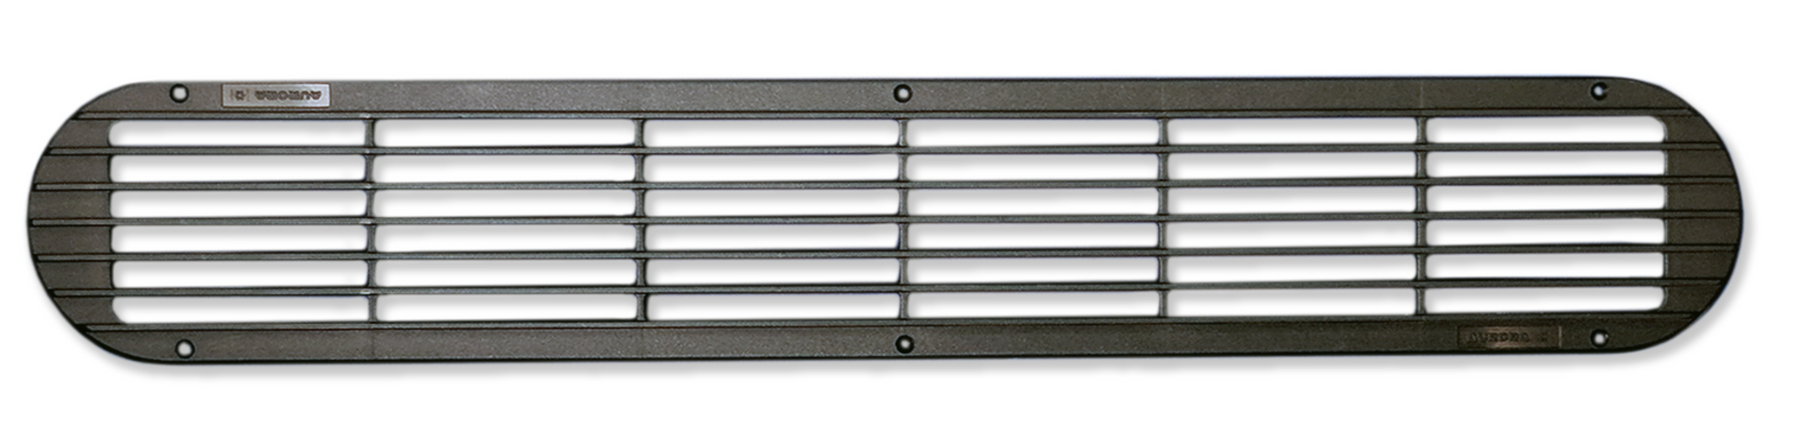 Cozy Grille 3.5 inches x 21.5 inches black plastic